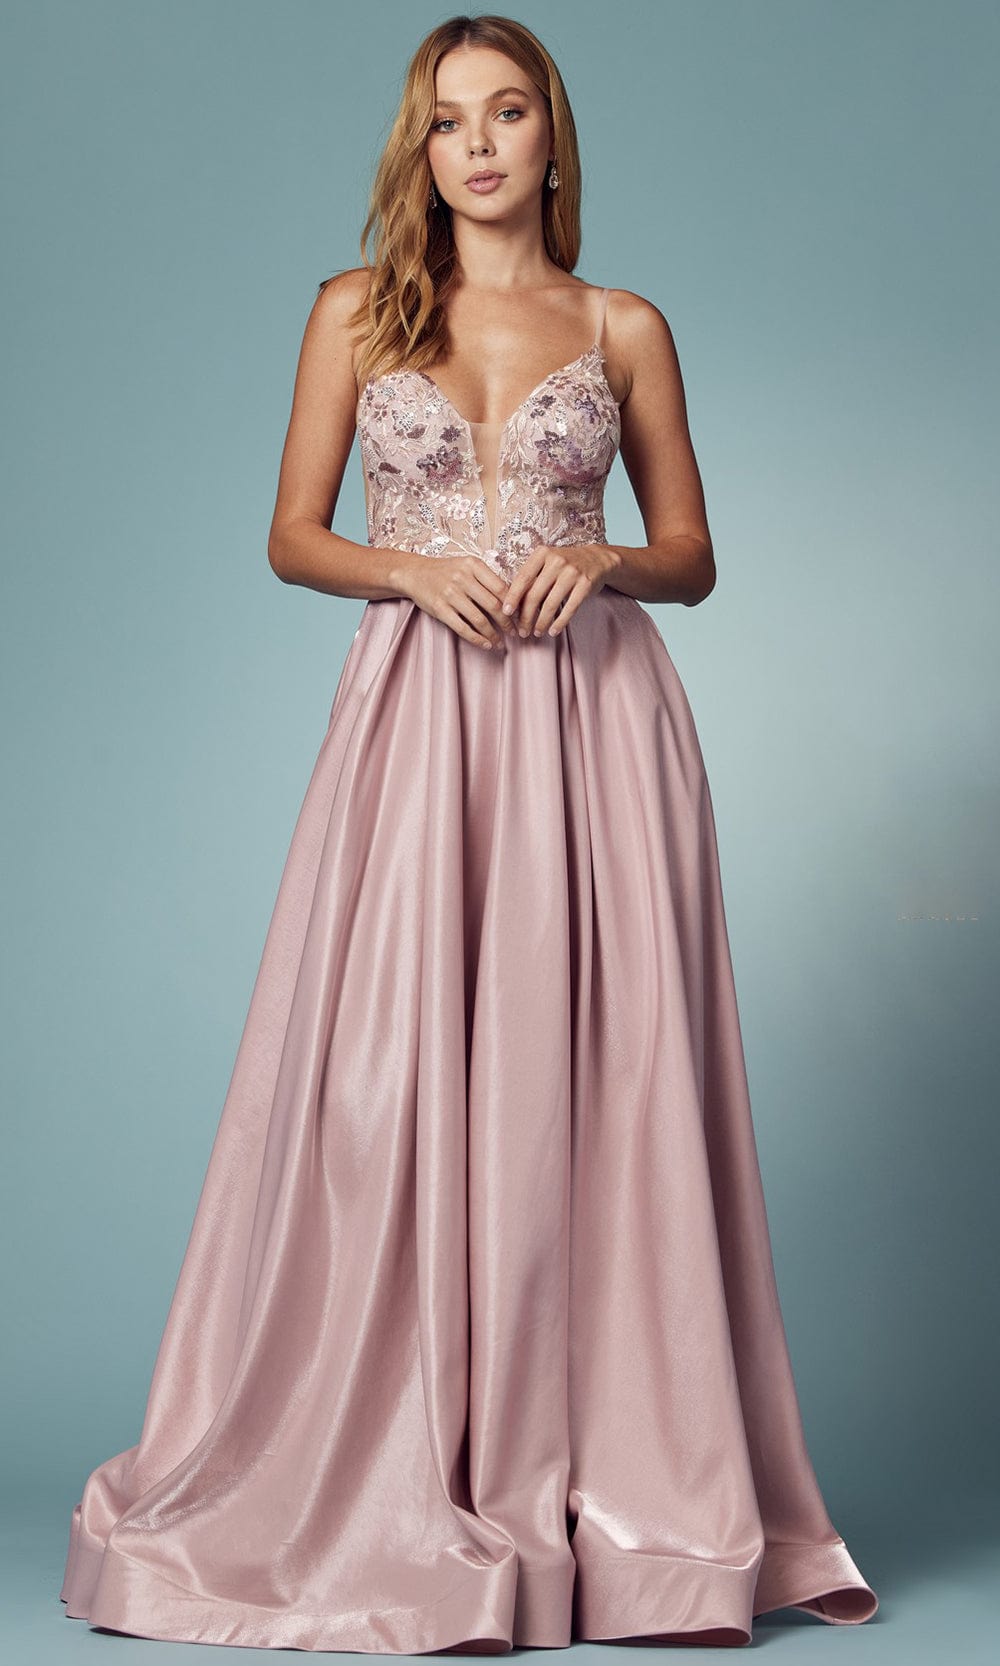 Image of Nox Anabel E1004 - Floral A-Line Prom Dress